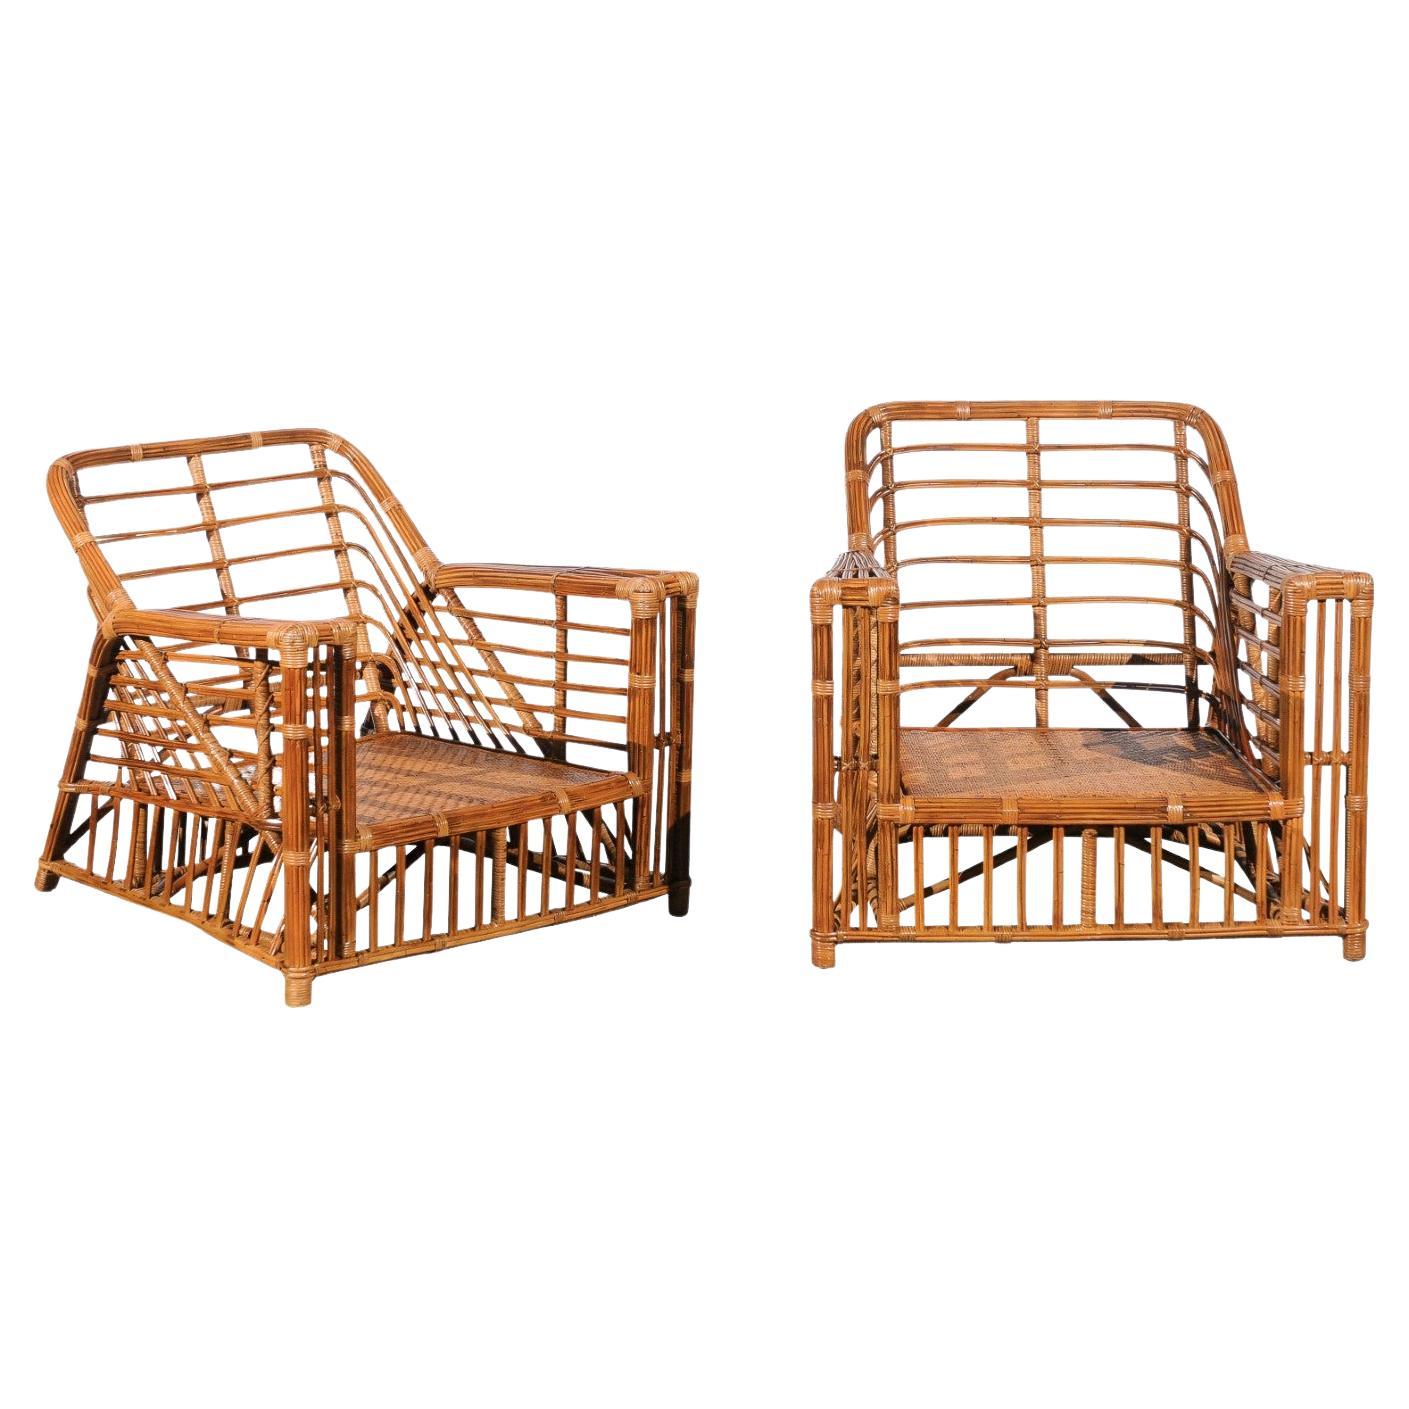 Exquisite Restored Pair of Modern President's Loungers by McGuire, circa 1985